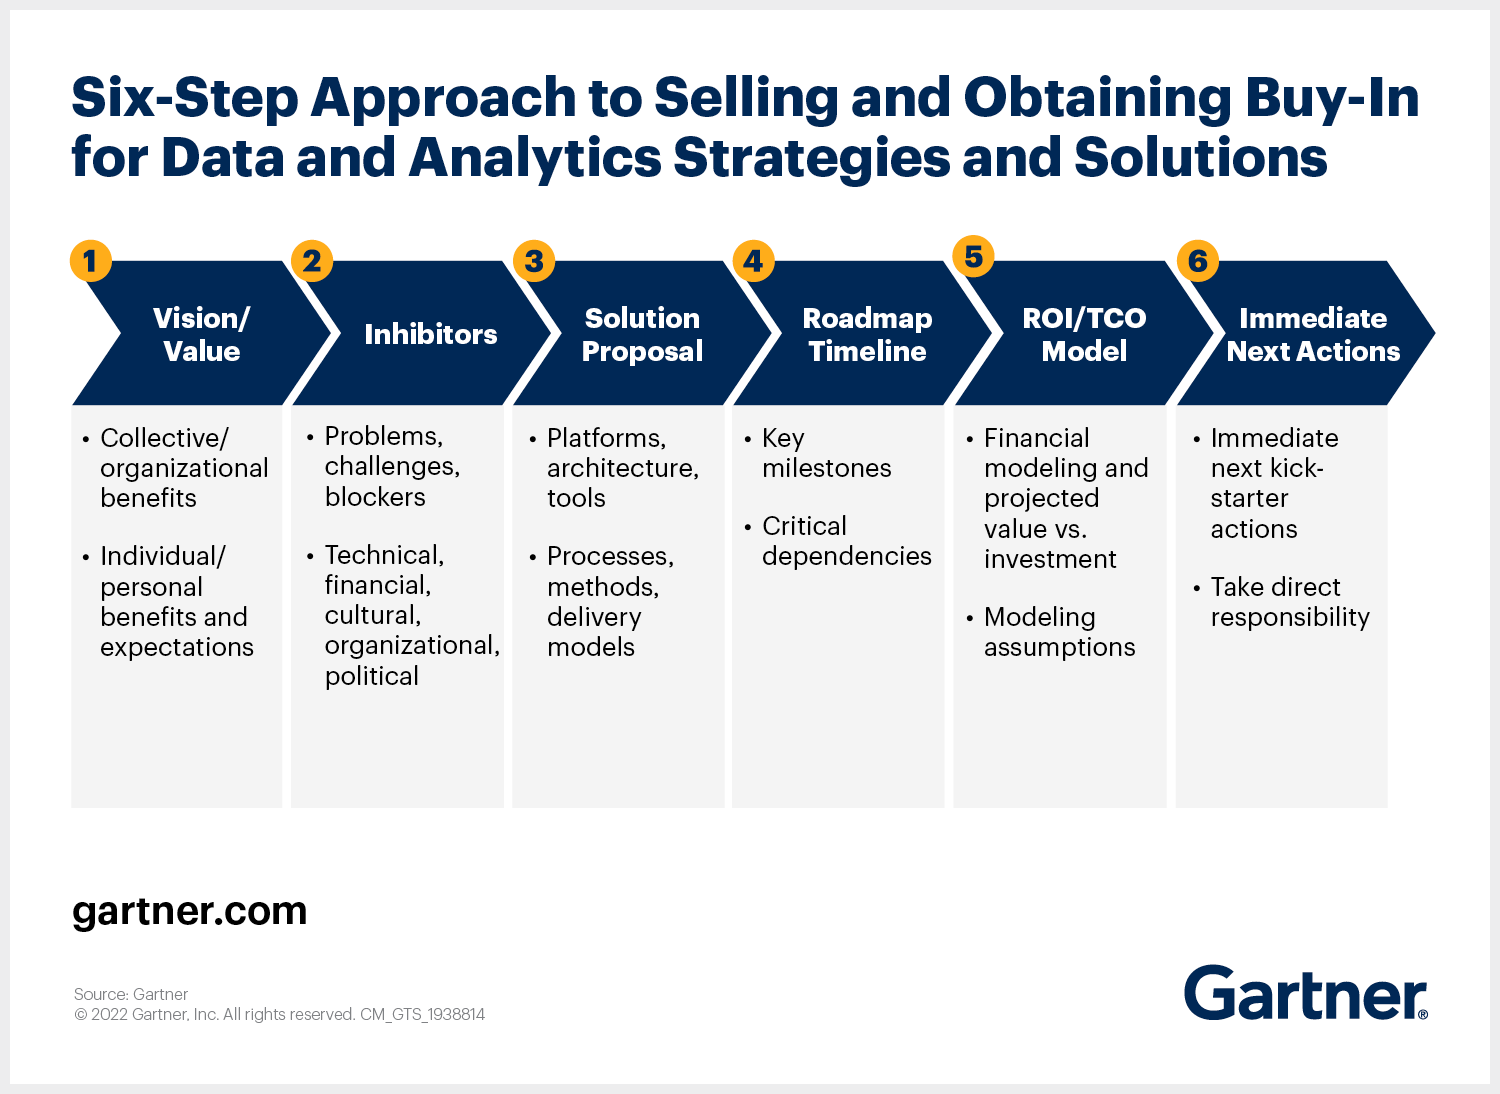 How one can get buy-in for information and analytics methods, CIO Information, ET CIO